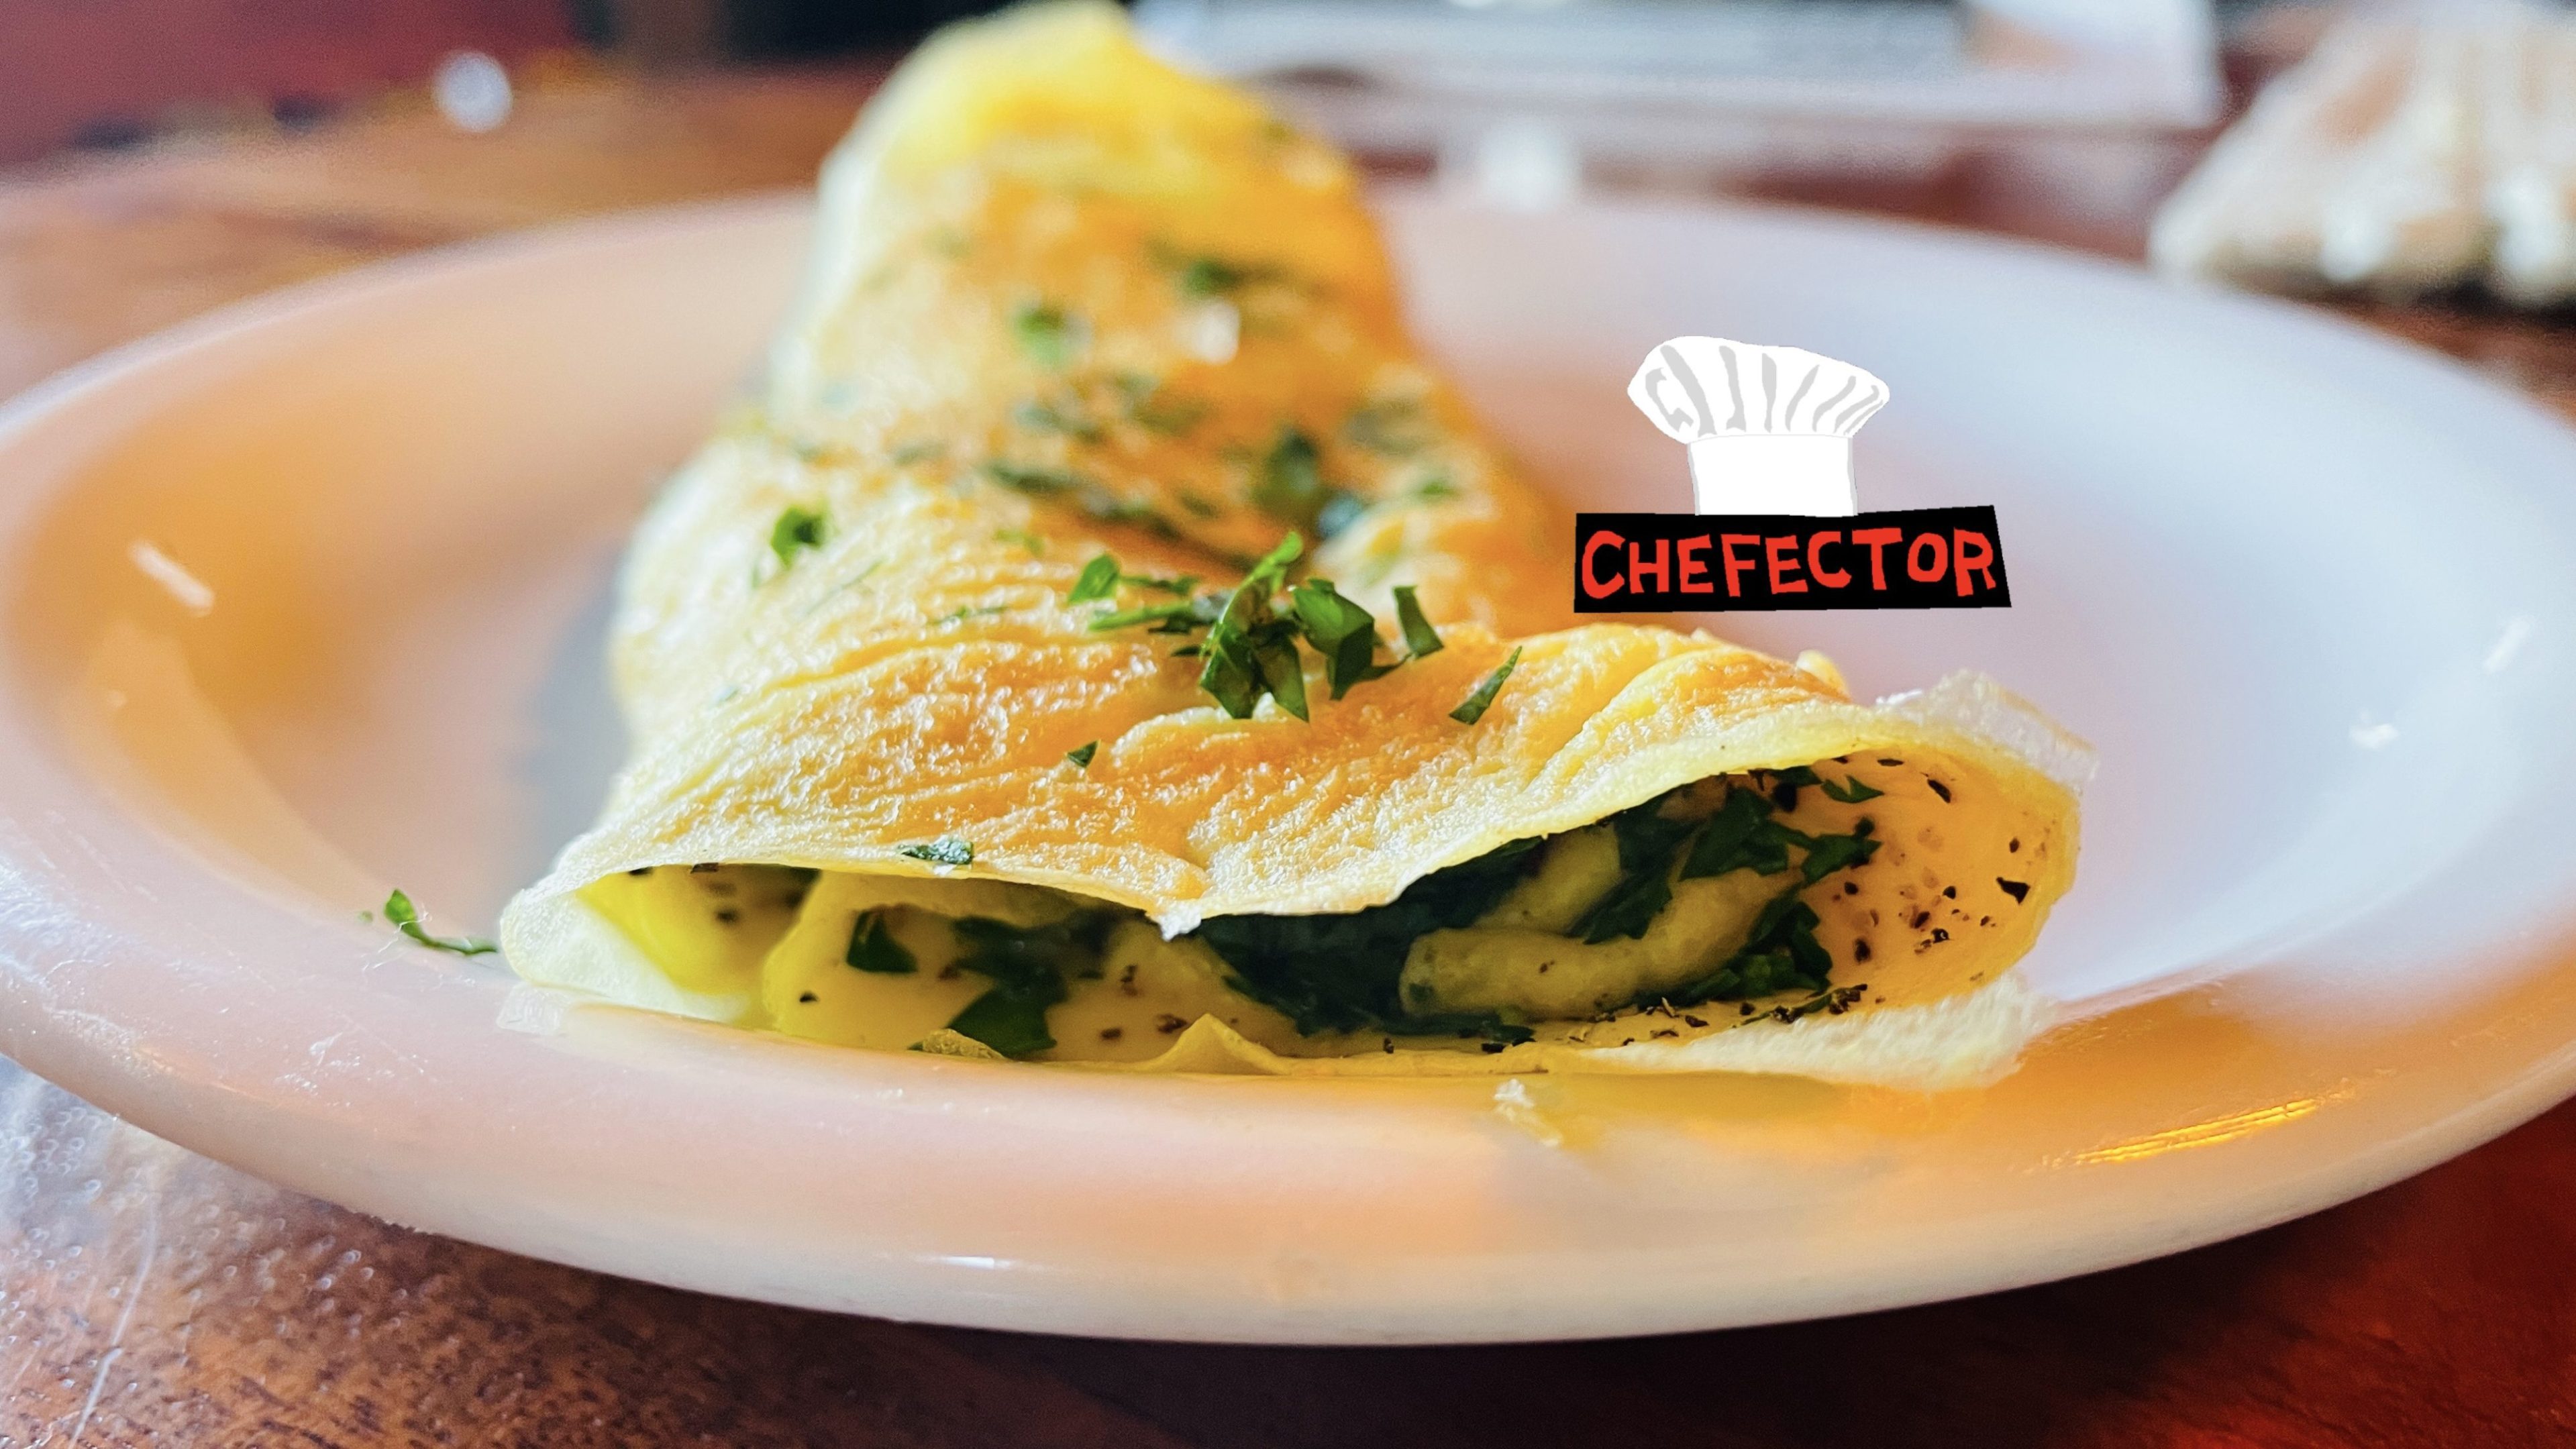 An omelet with herbs on it